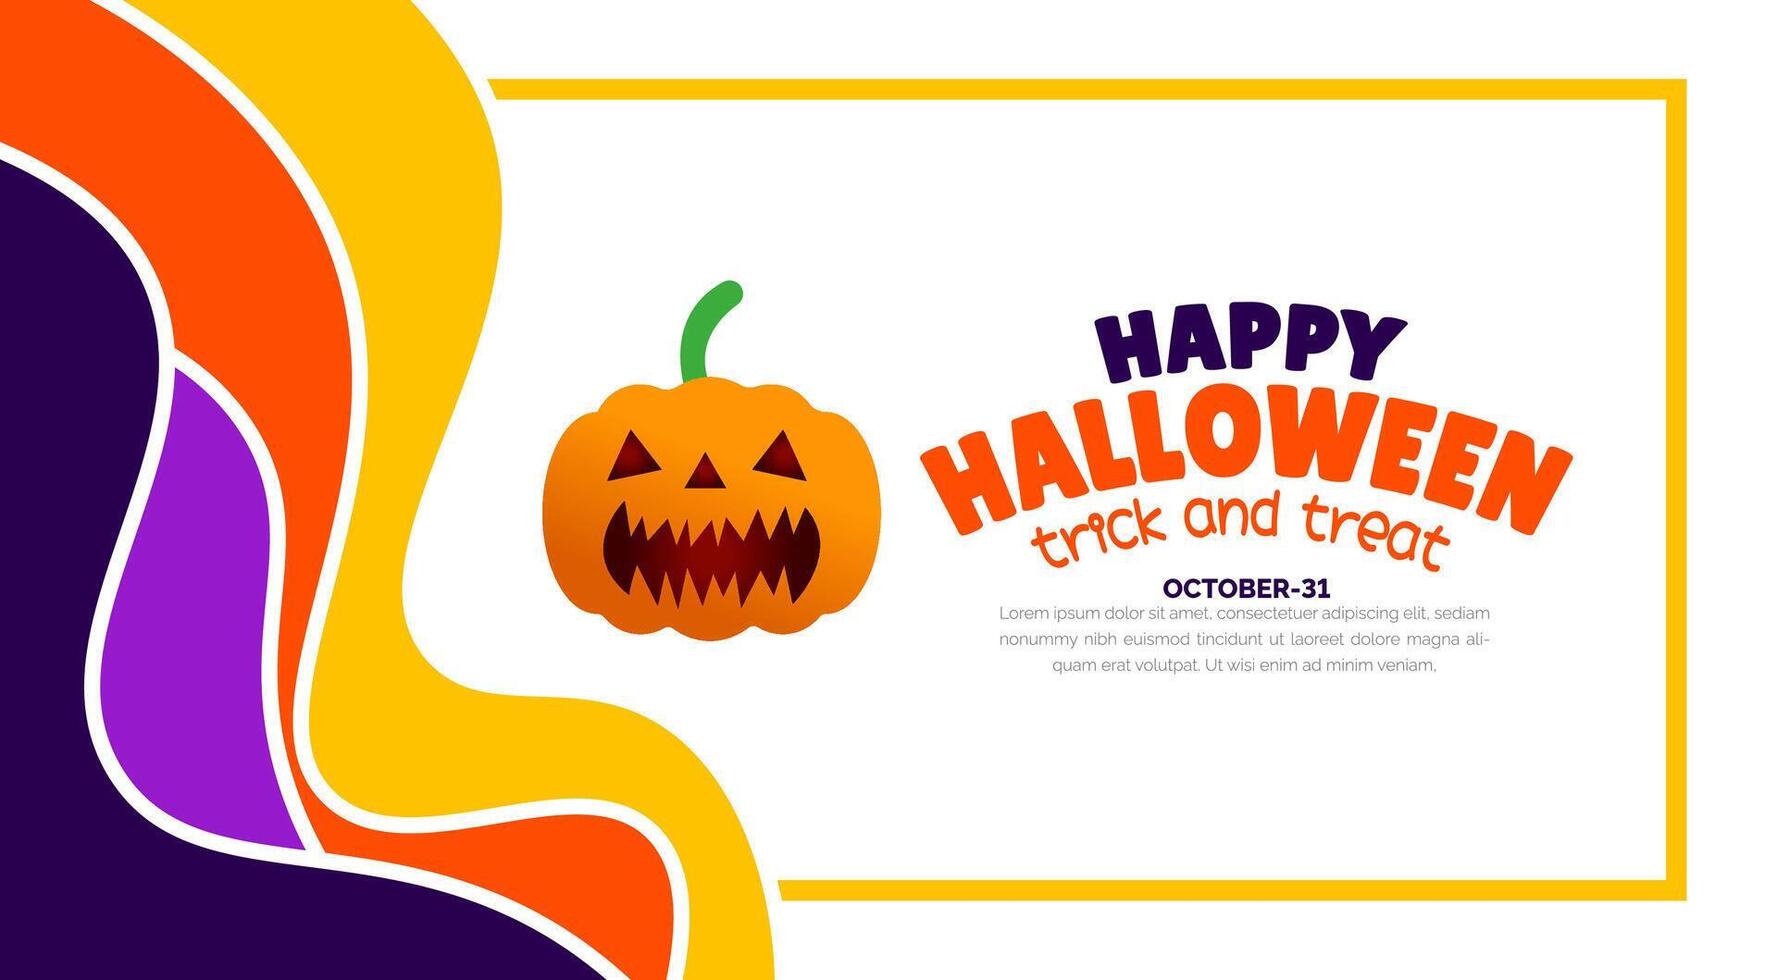 31 October happy Halloween background design with pumpkins. use to background, banner, placard, party invitation card, book cover and poster design template with text inscription and standard color. vector